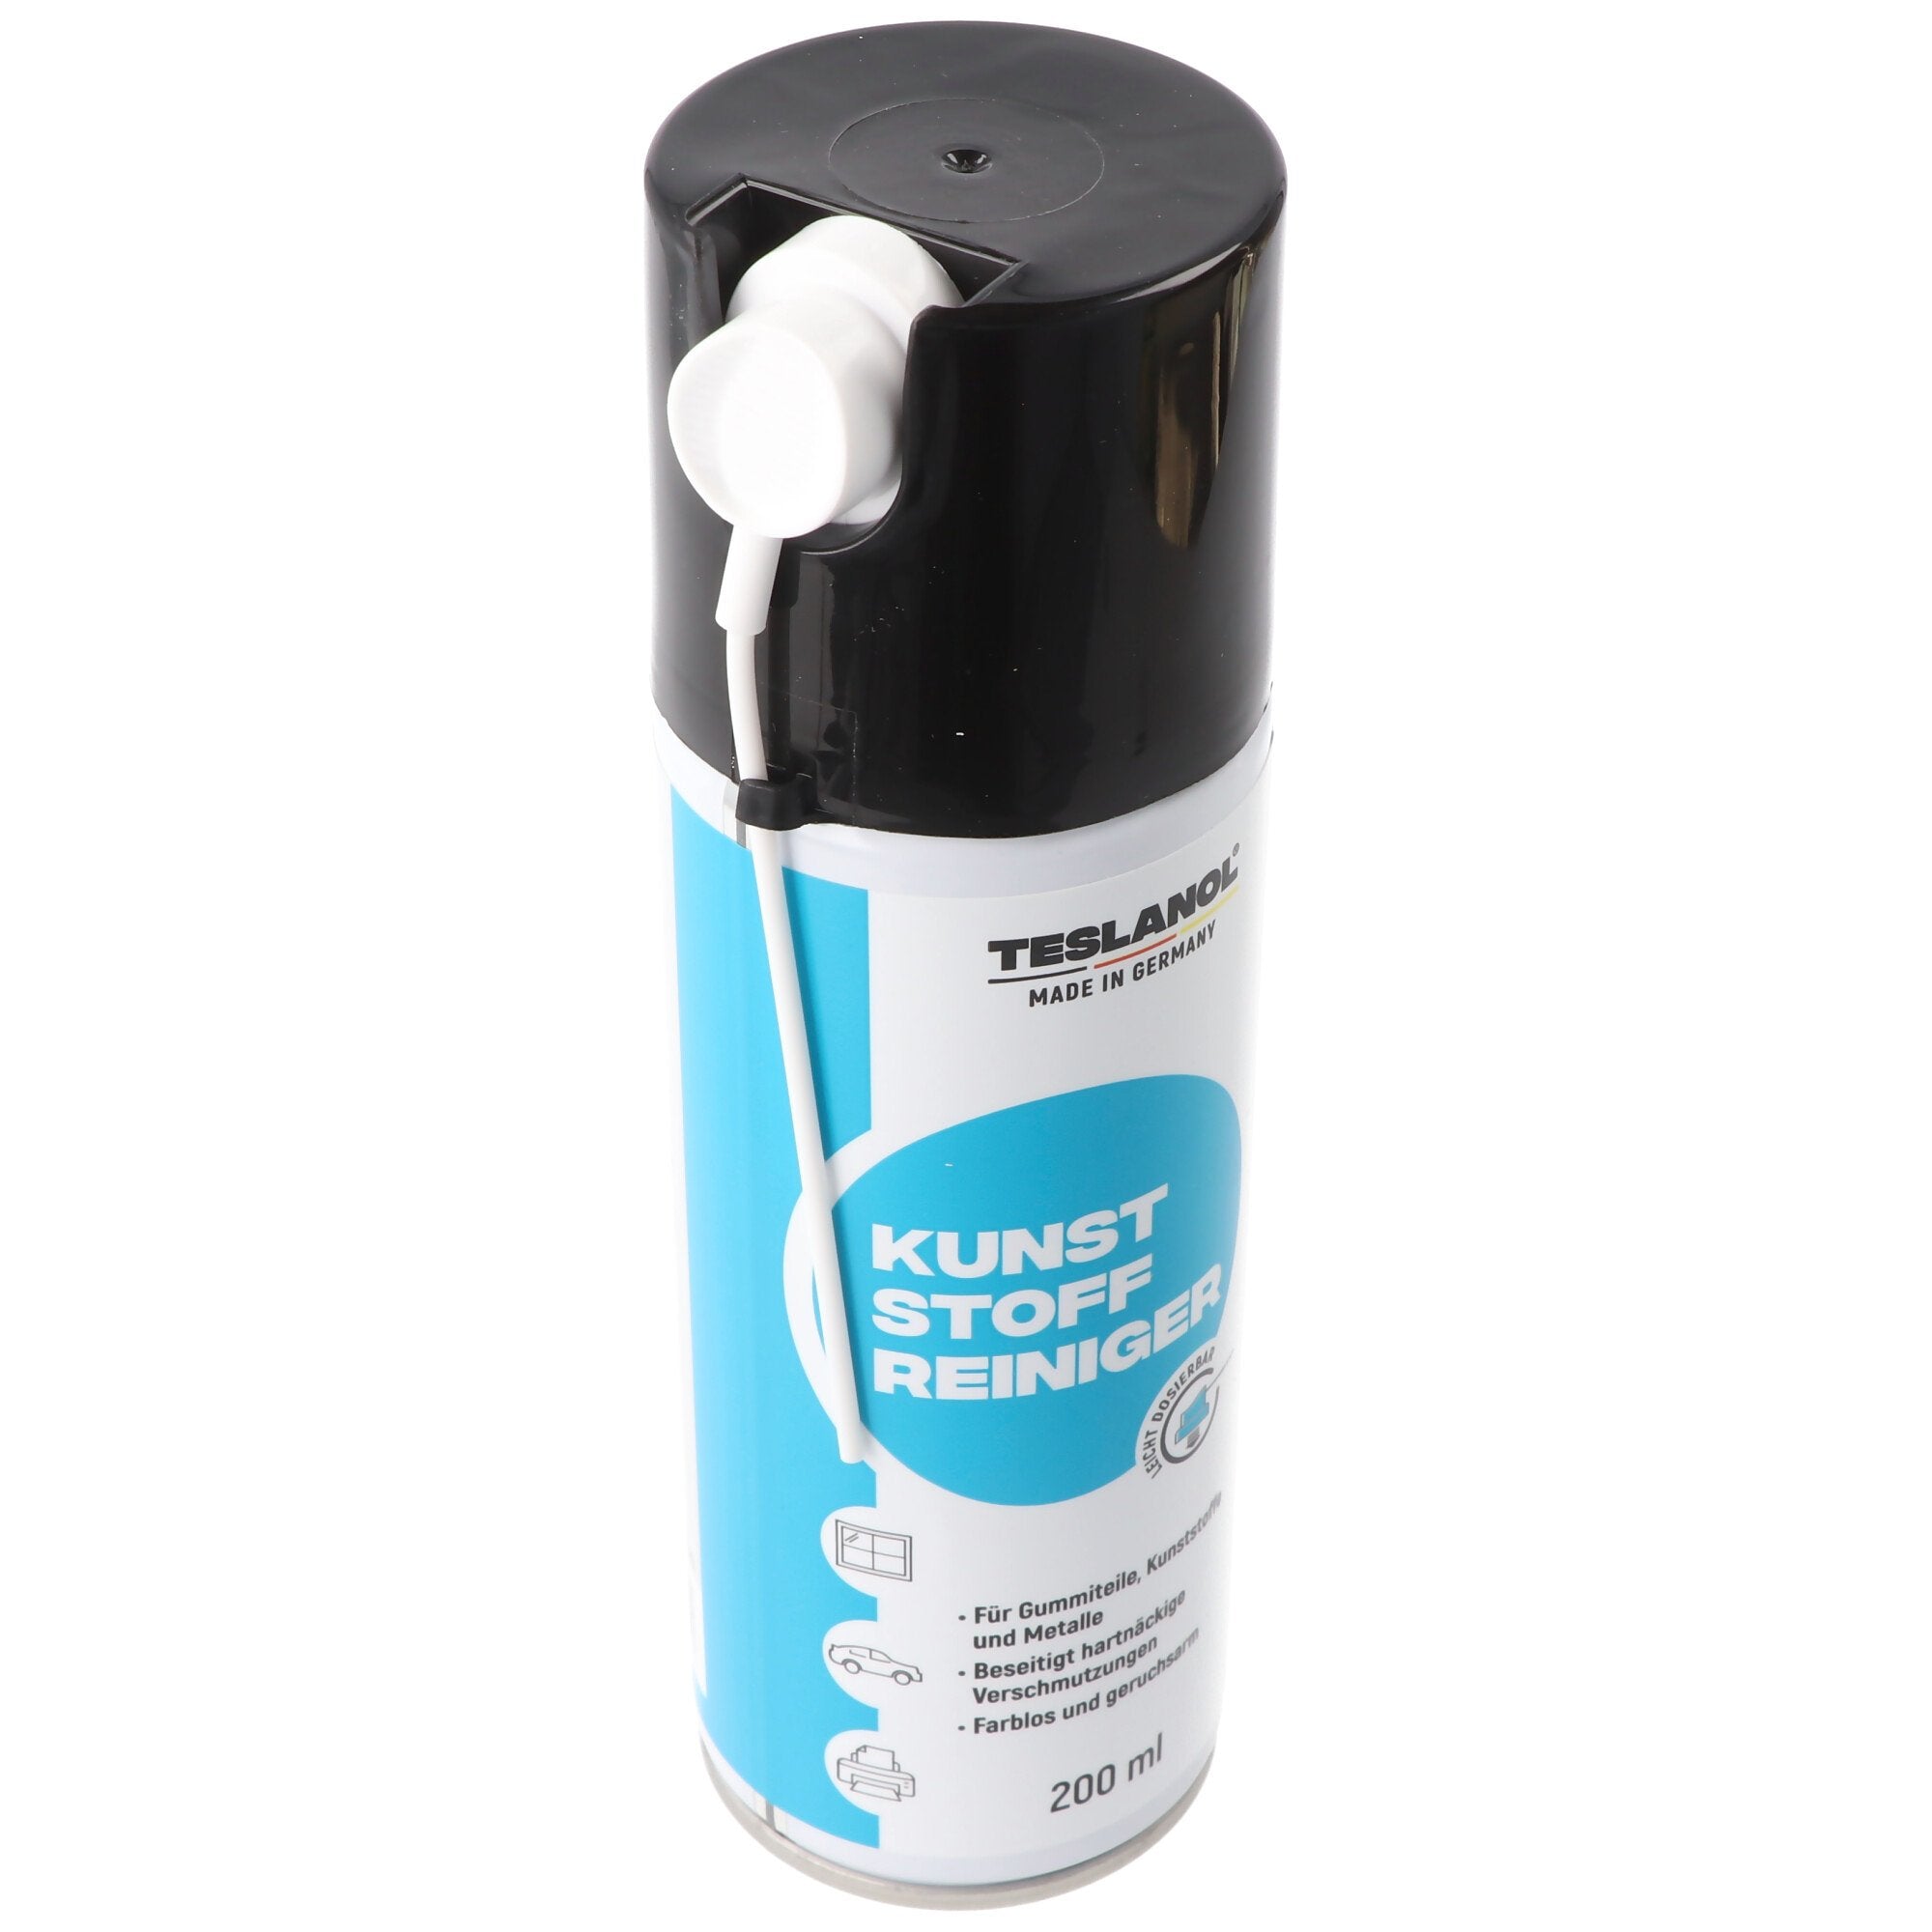 Teslanol GR rubber cleaner spray 200ml especially for rubber parts